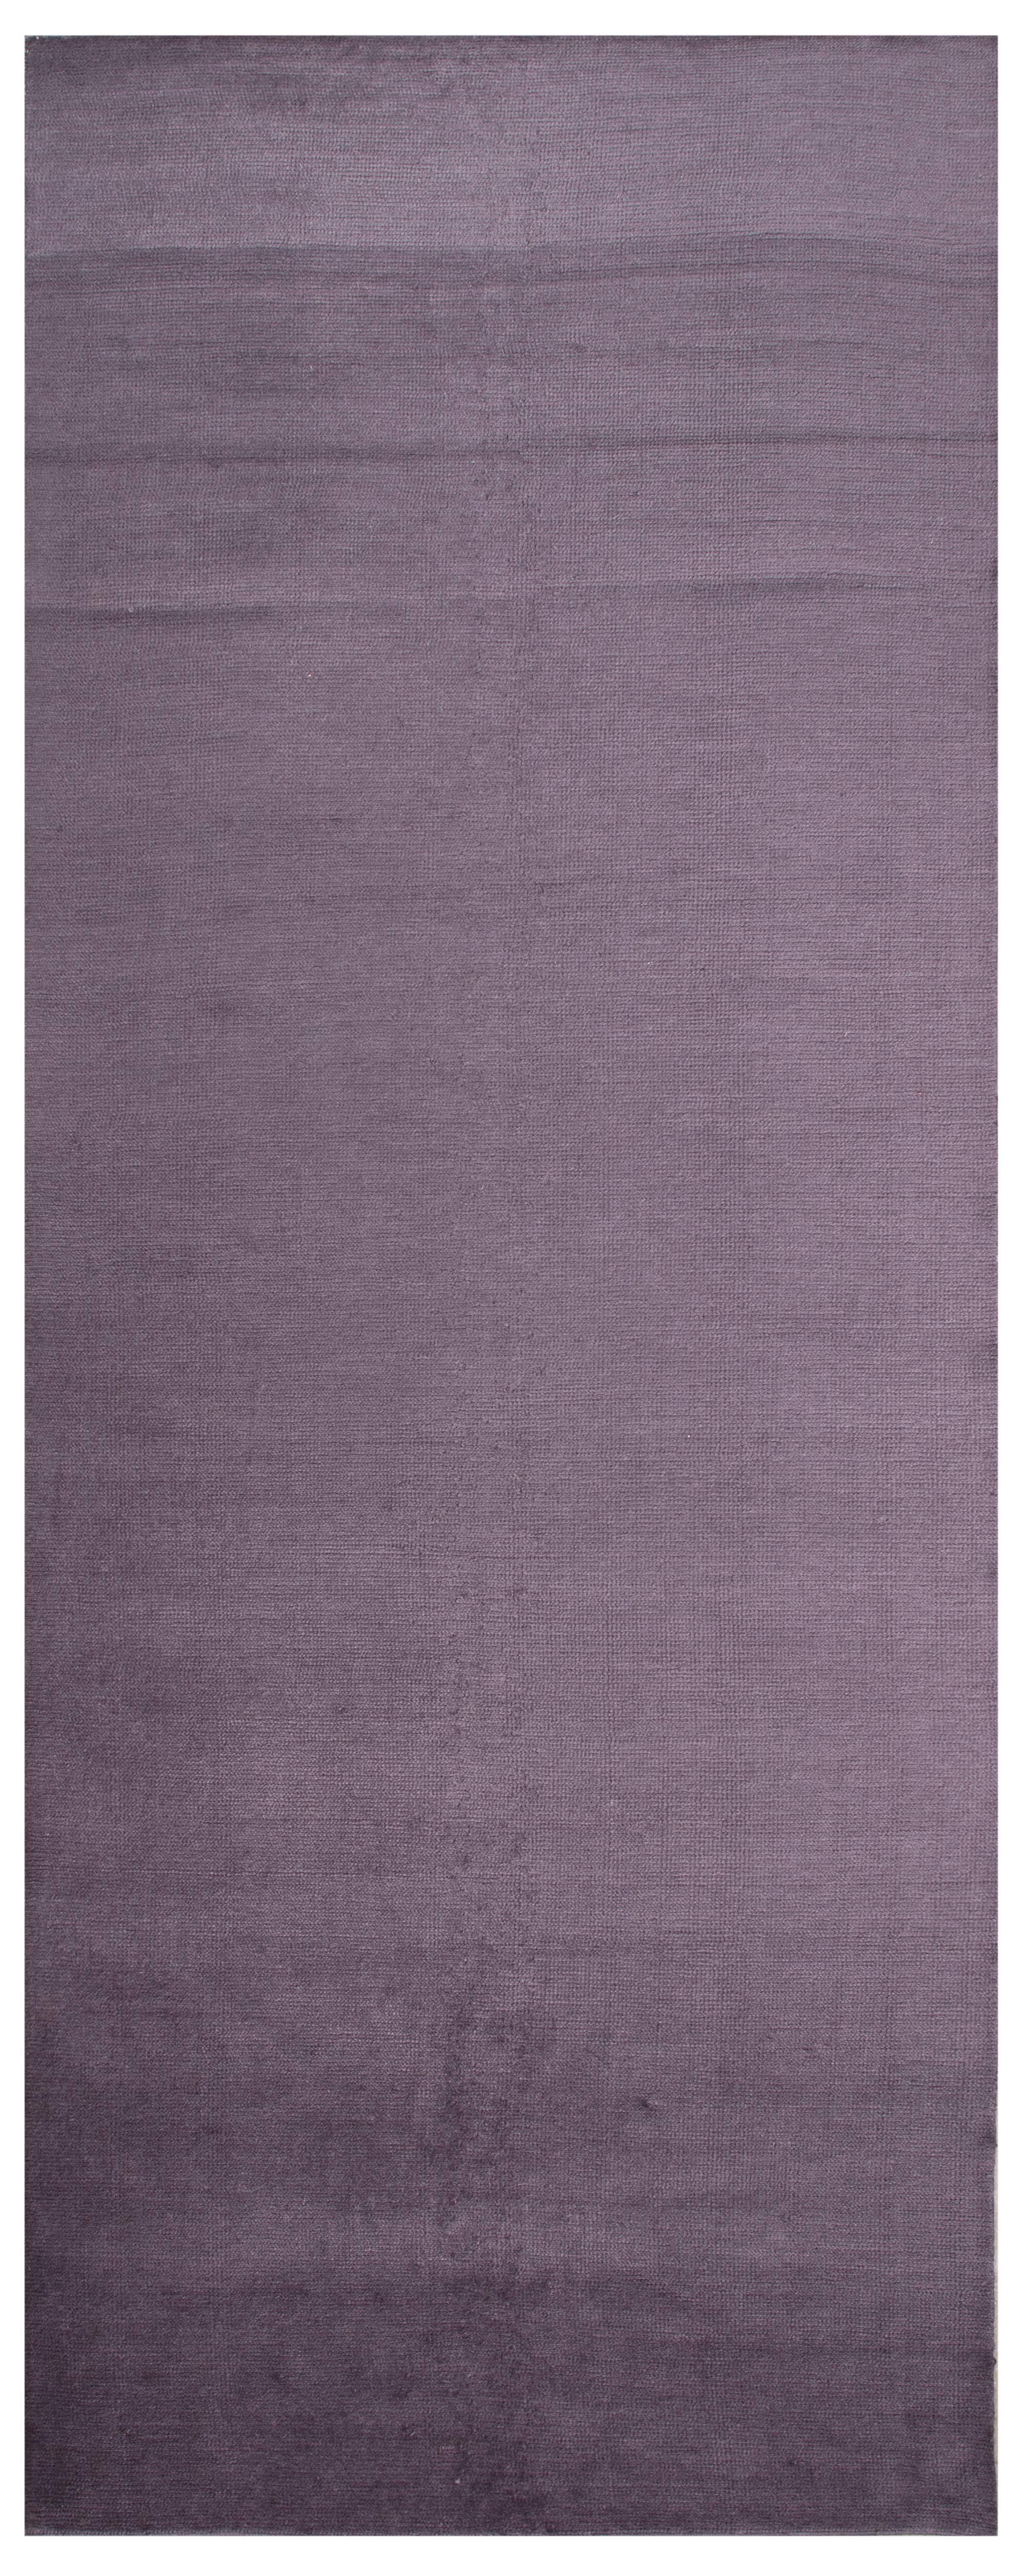 This stunning navy blue runner is made with the finest mohair for an uber luxe feel. It has a subtle aubergine tone in the sheer of the mohair but it is definitely navy. Our mohair is soft and silky and can be woven in the 